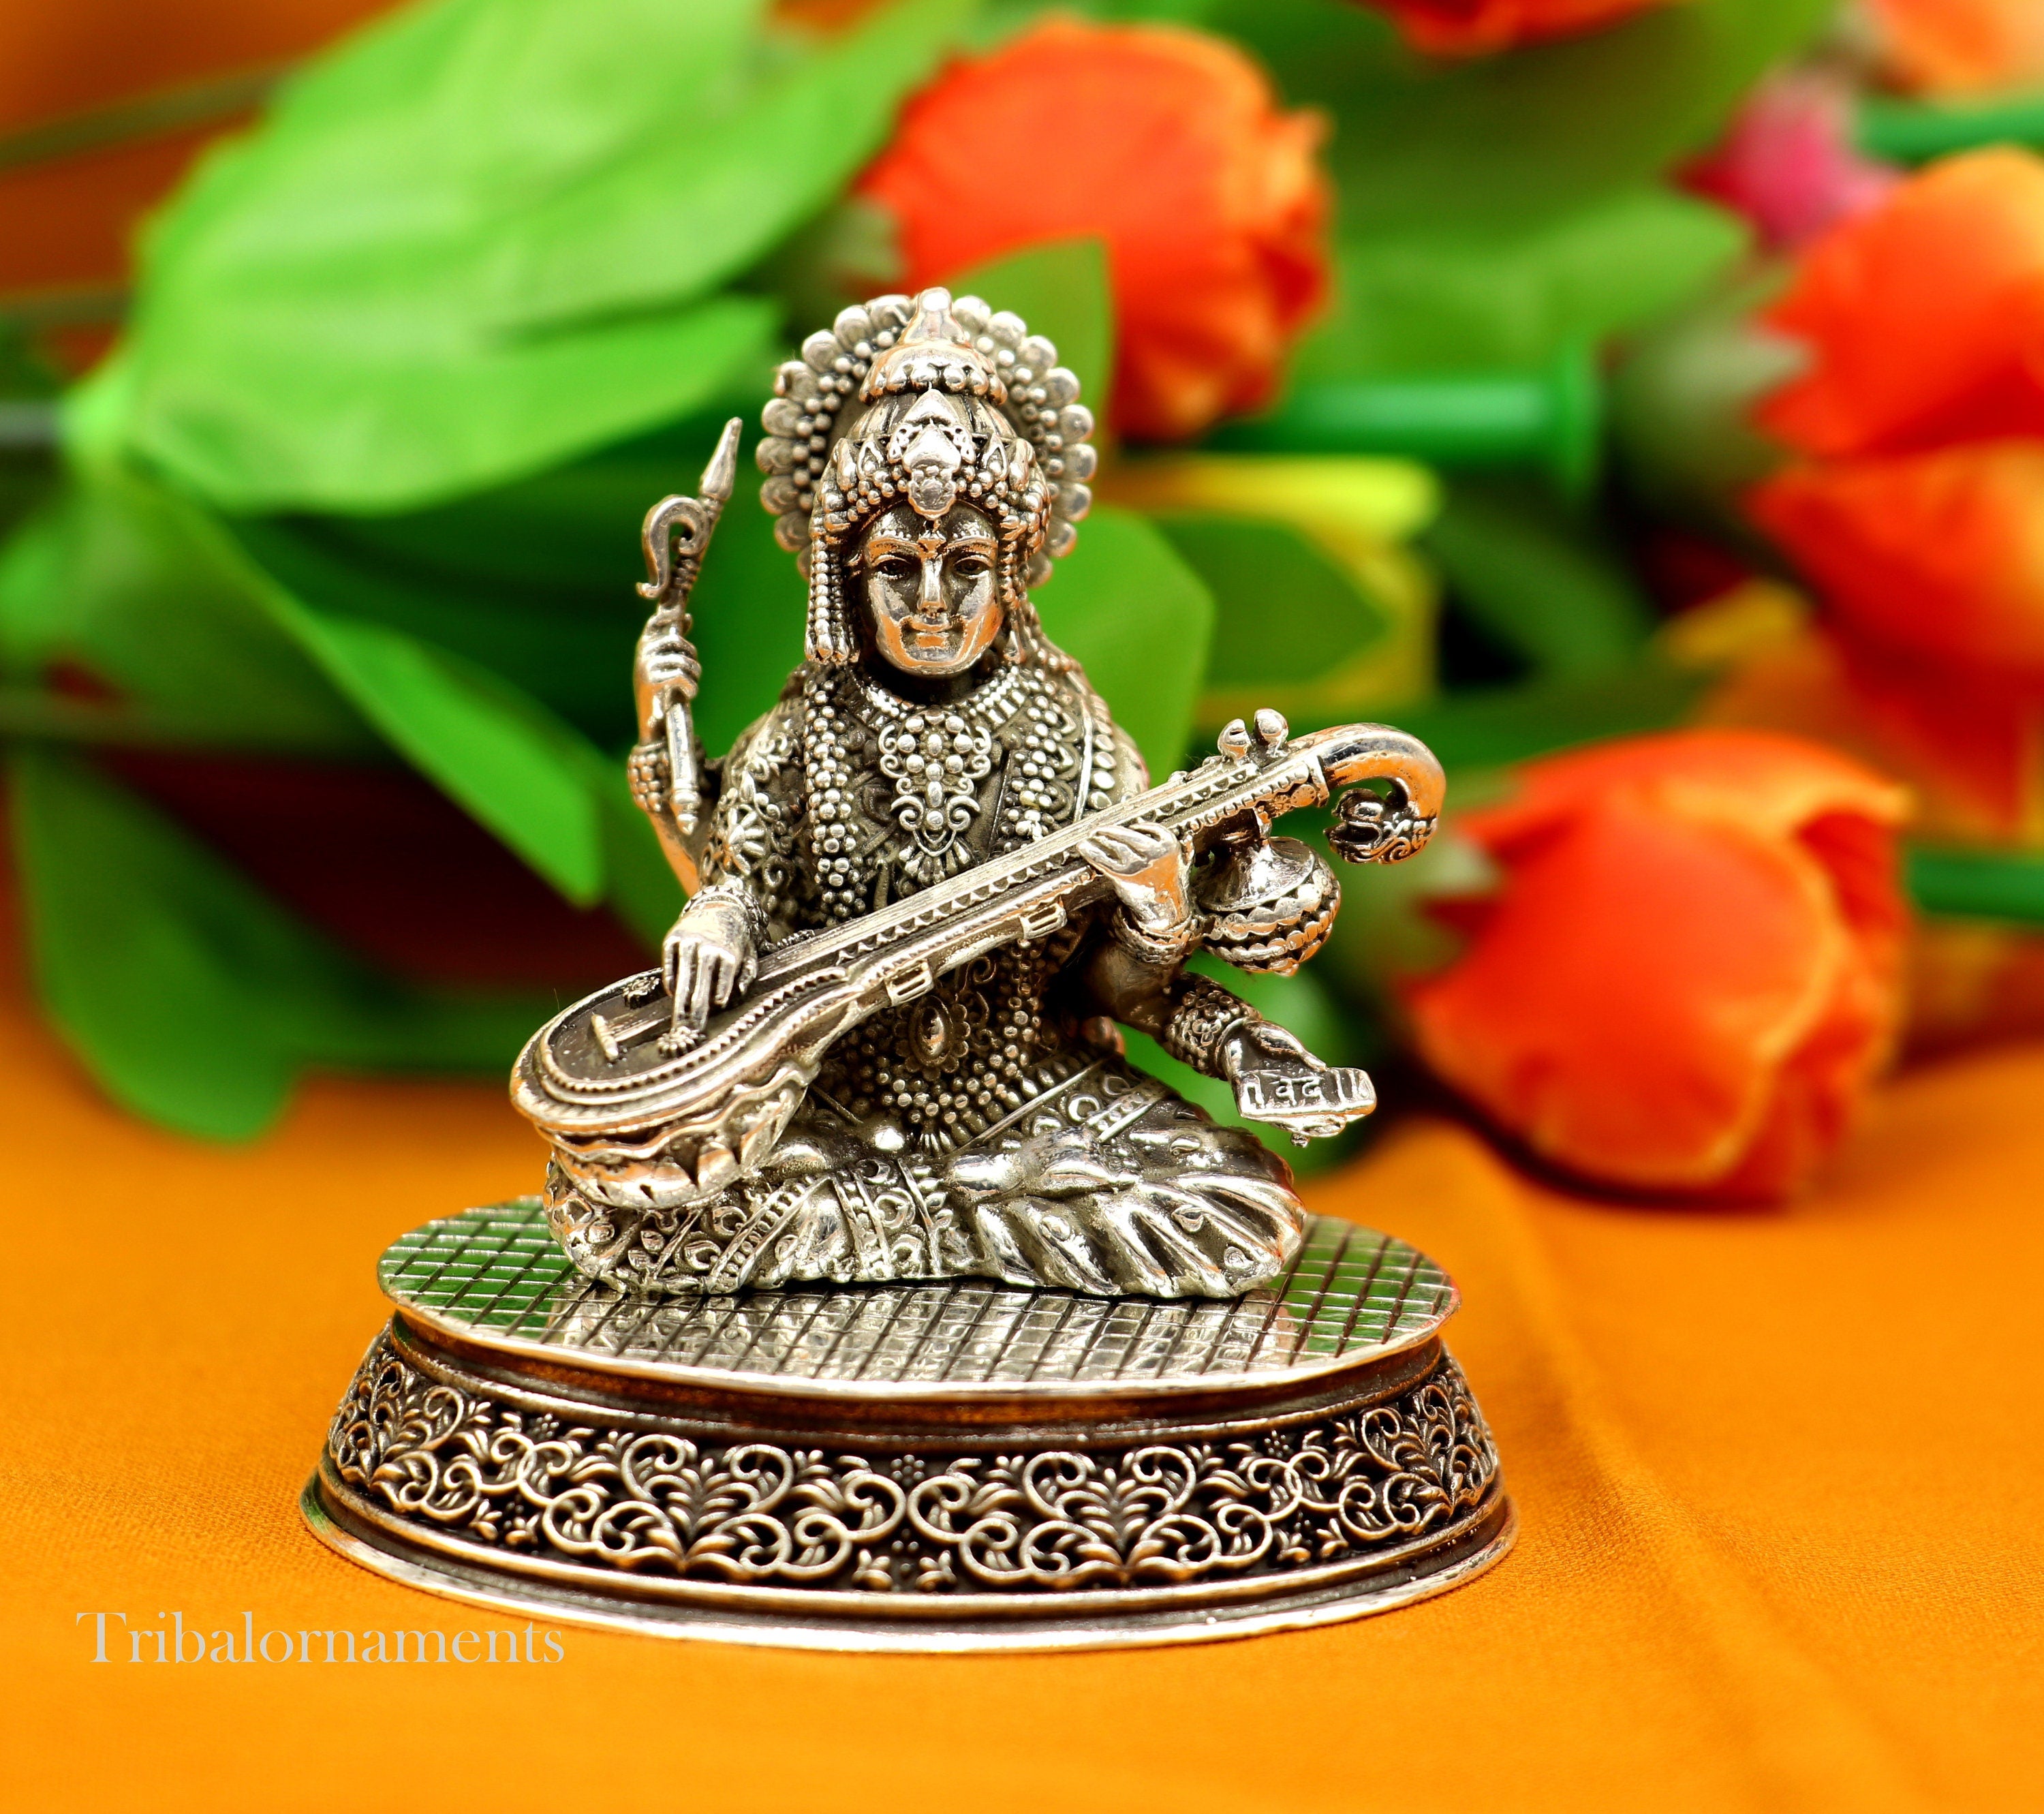 Buy WELLWISHERS CRAFTHindu Goddess Maa Durga Religious Metal Statue with  Lion Figurine for Home Decor Gift Online at Best Prices in India - JioMart.